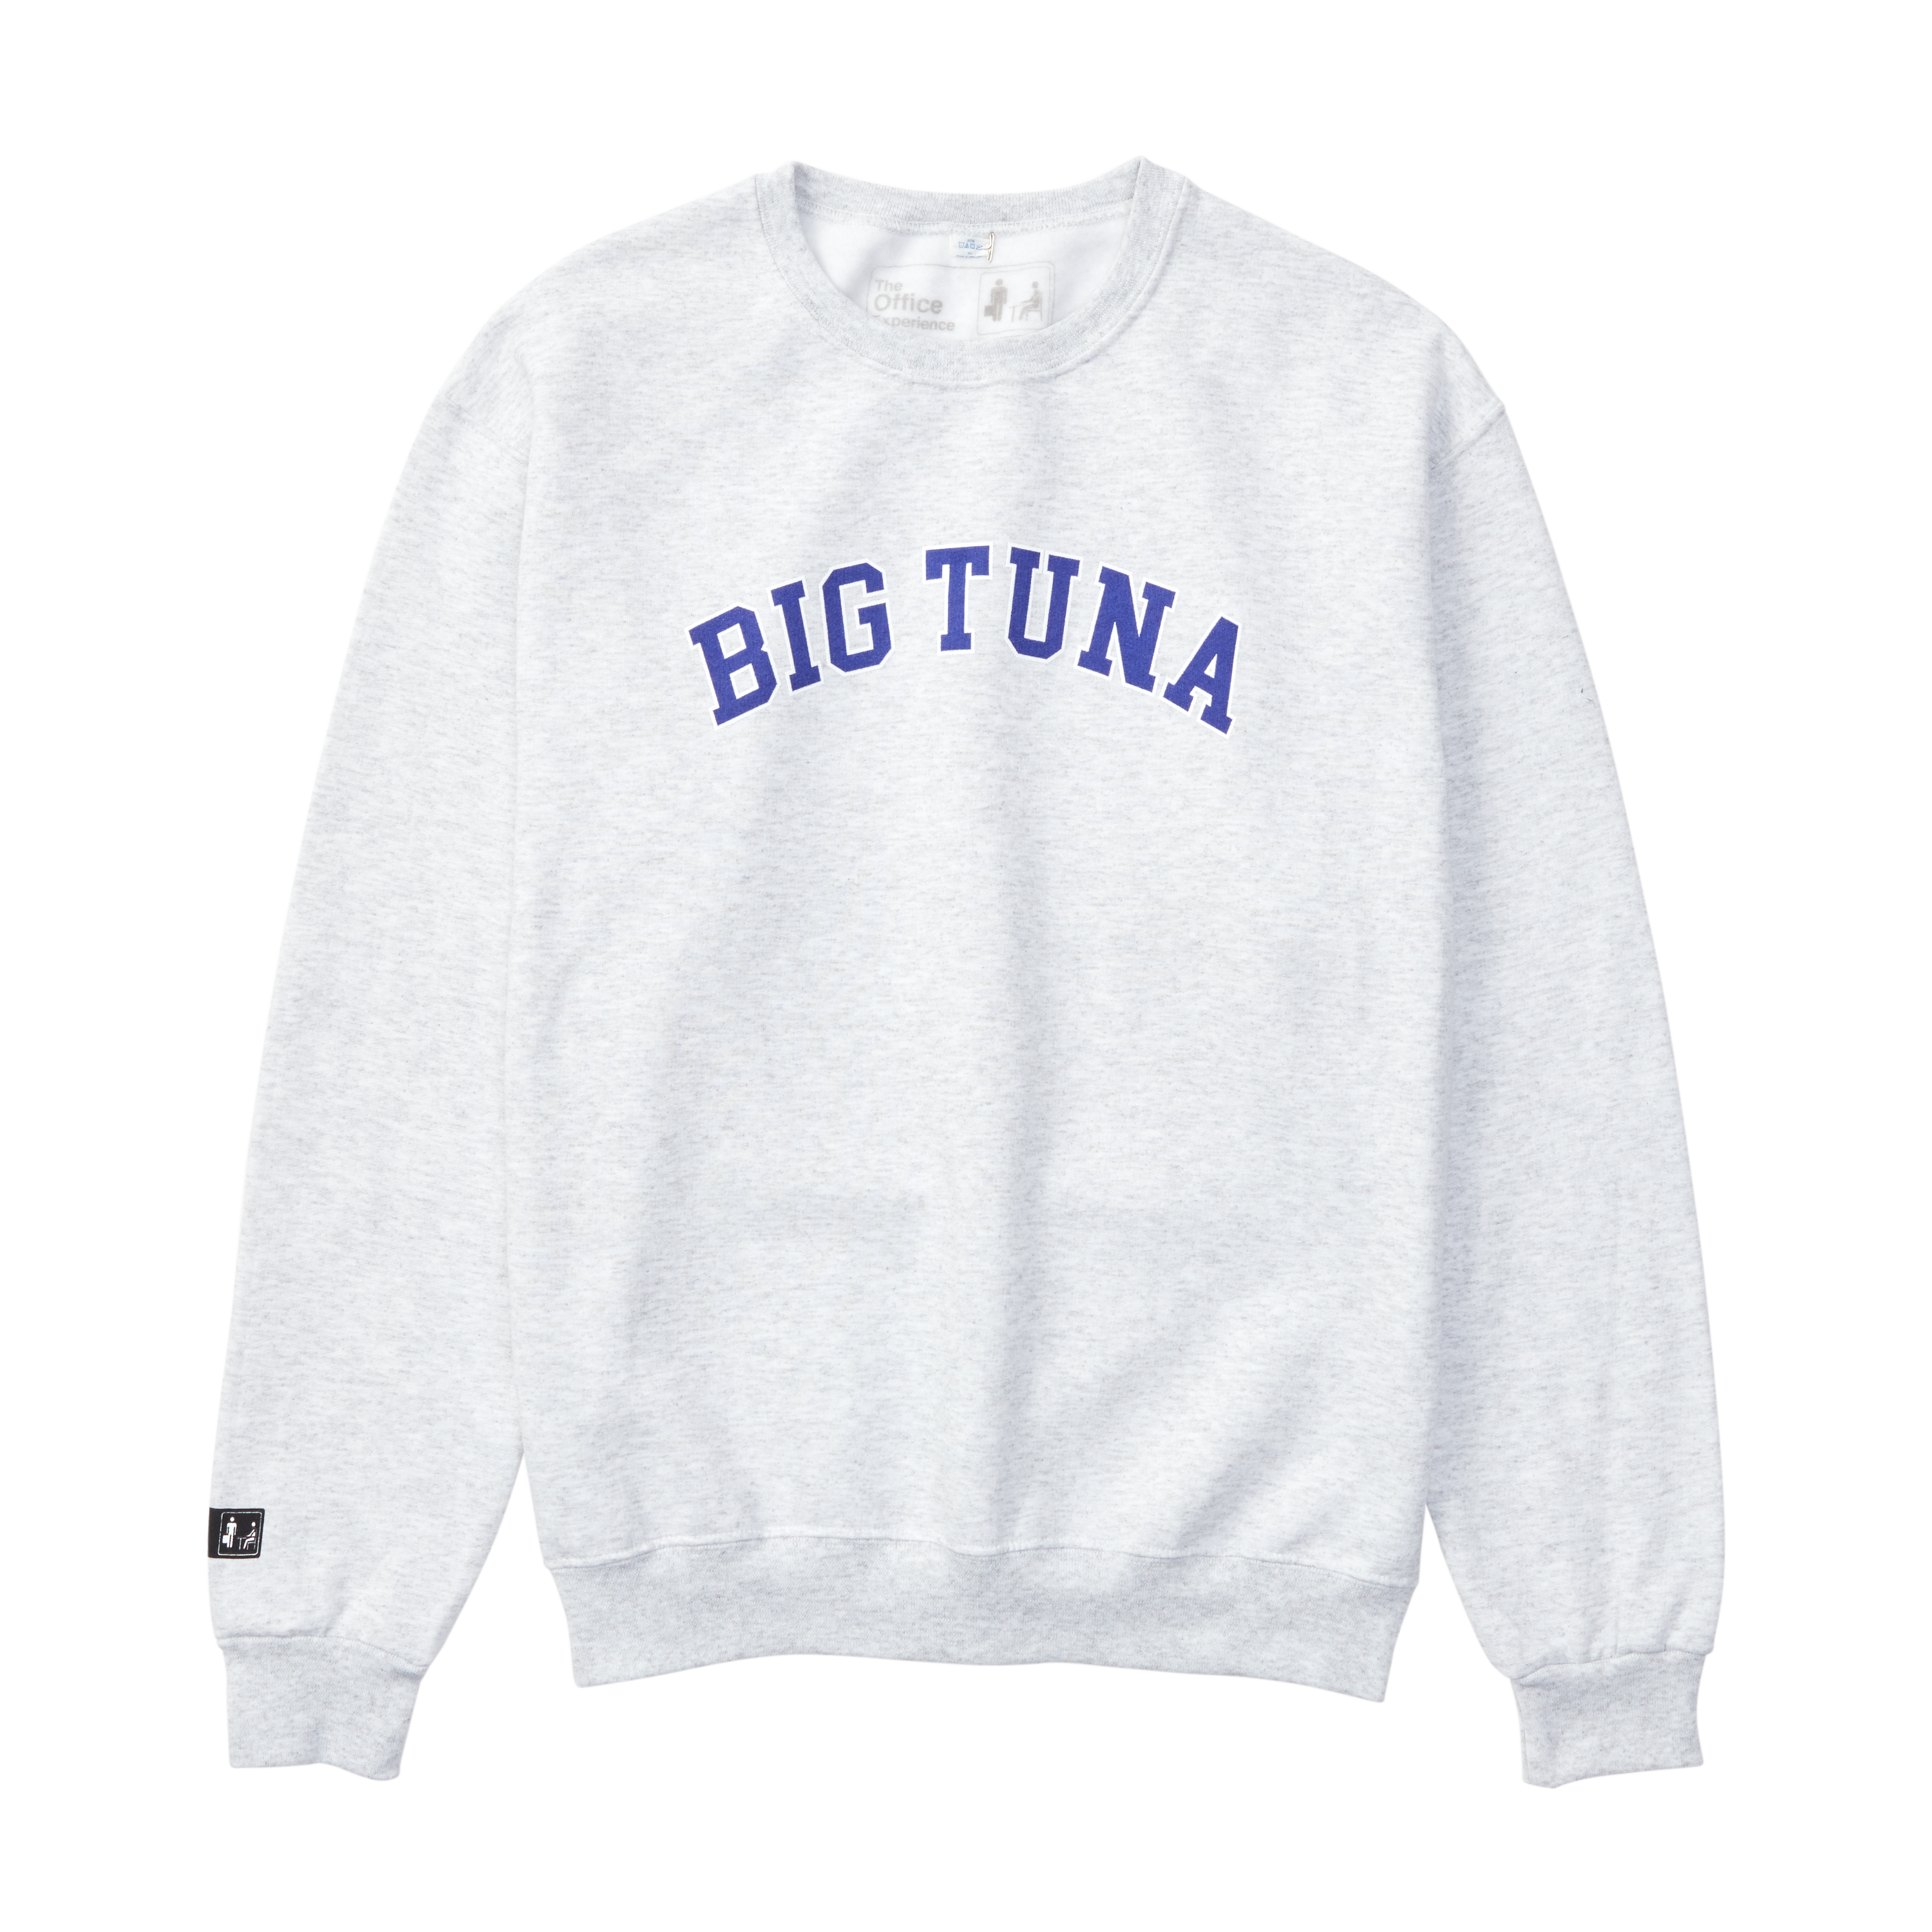 The Office Experience Official Store Big Tuna Collegiate Sweatshirt Grey –  The Office Experience Store